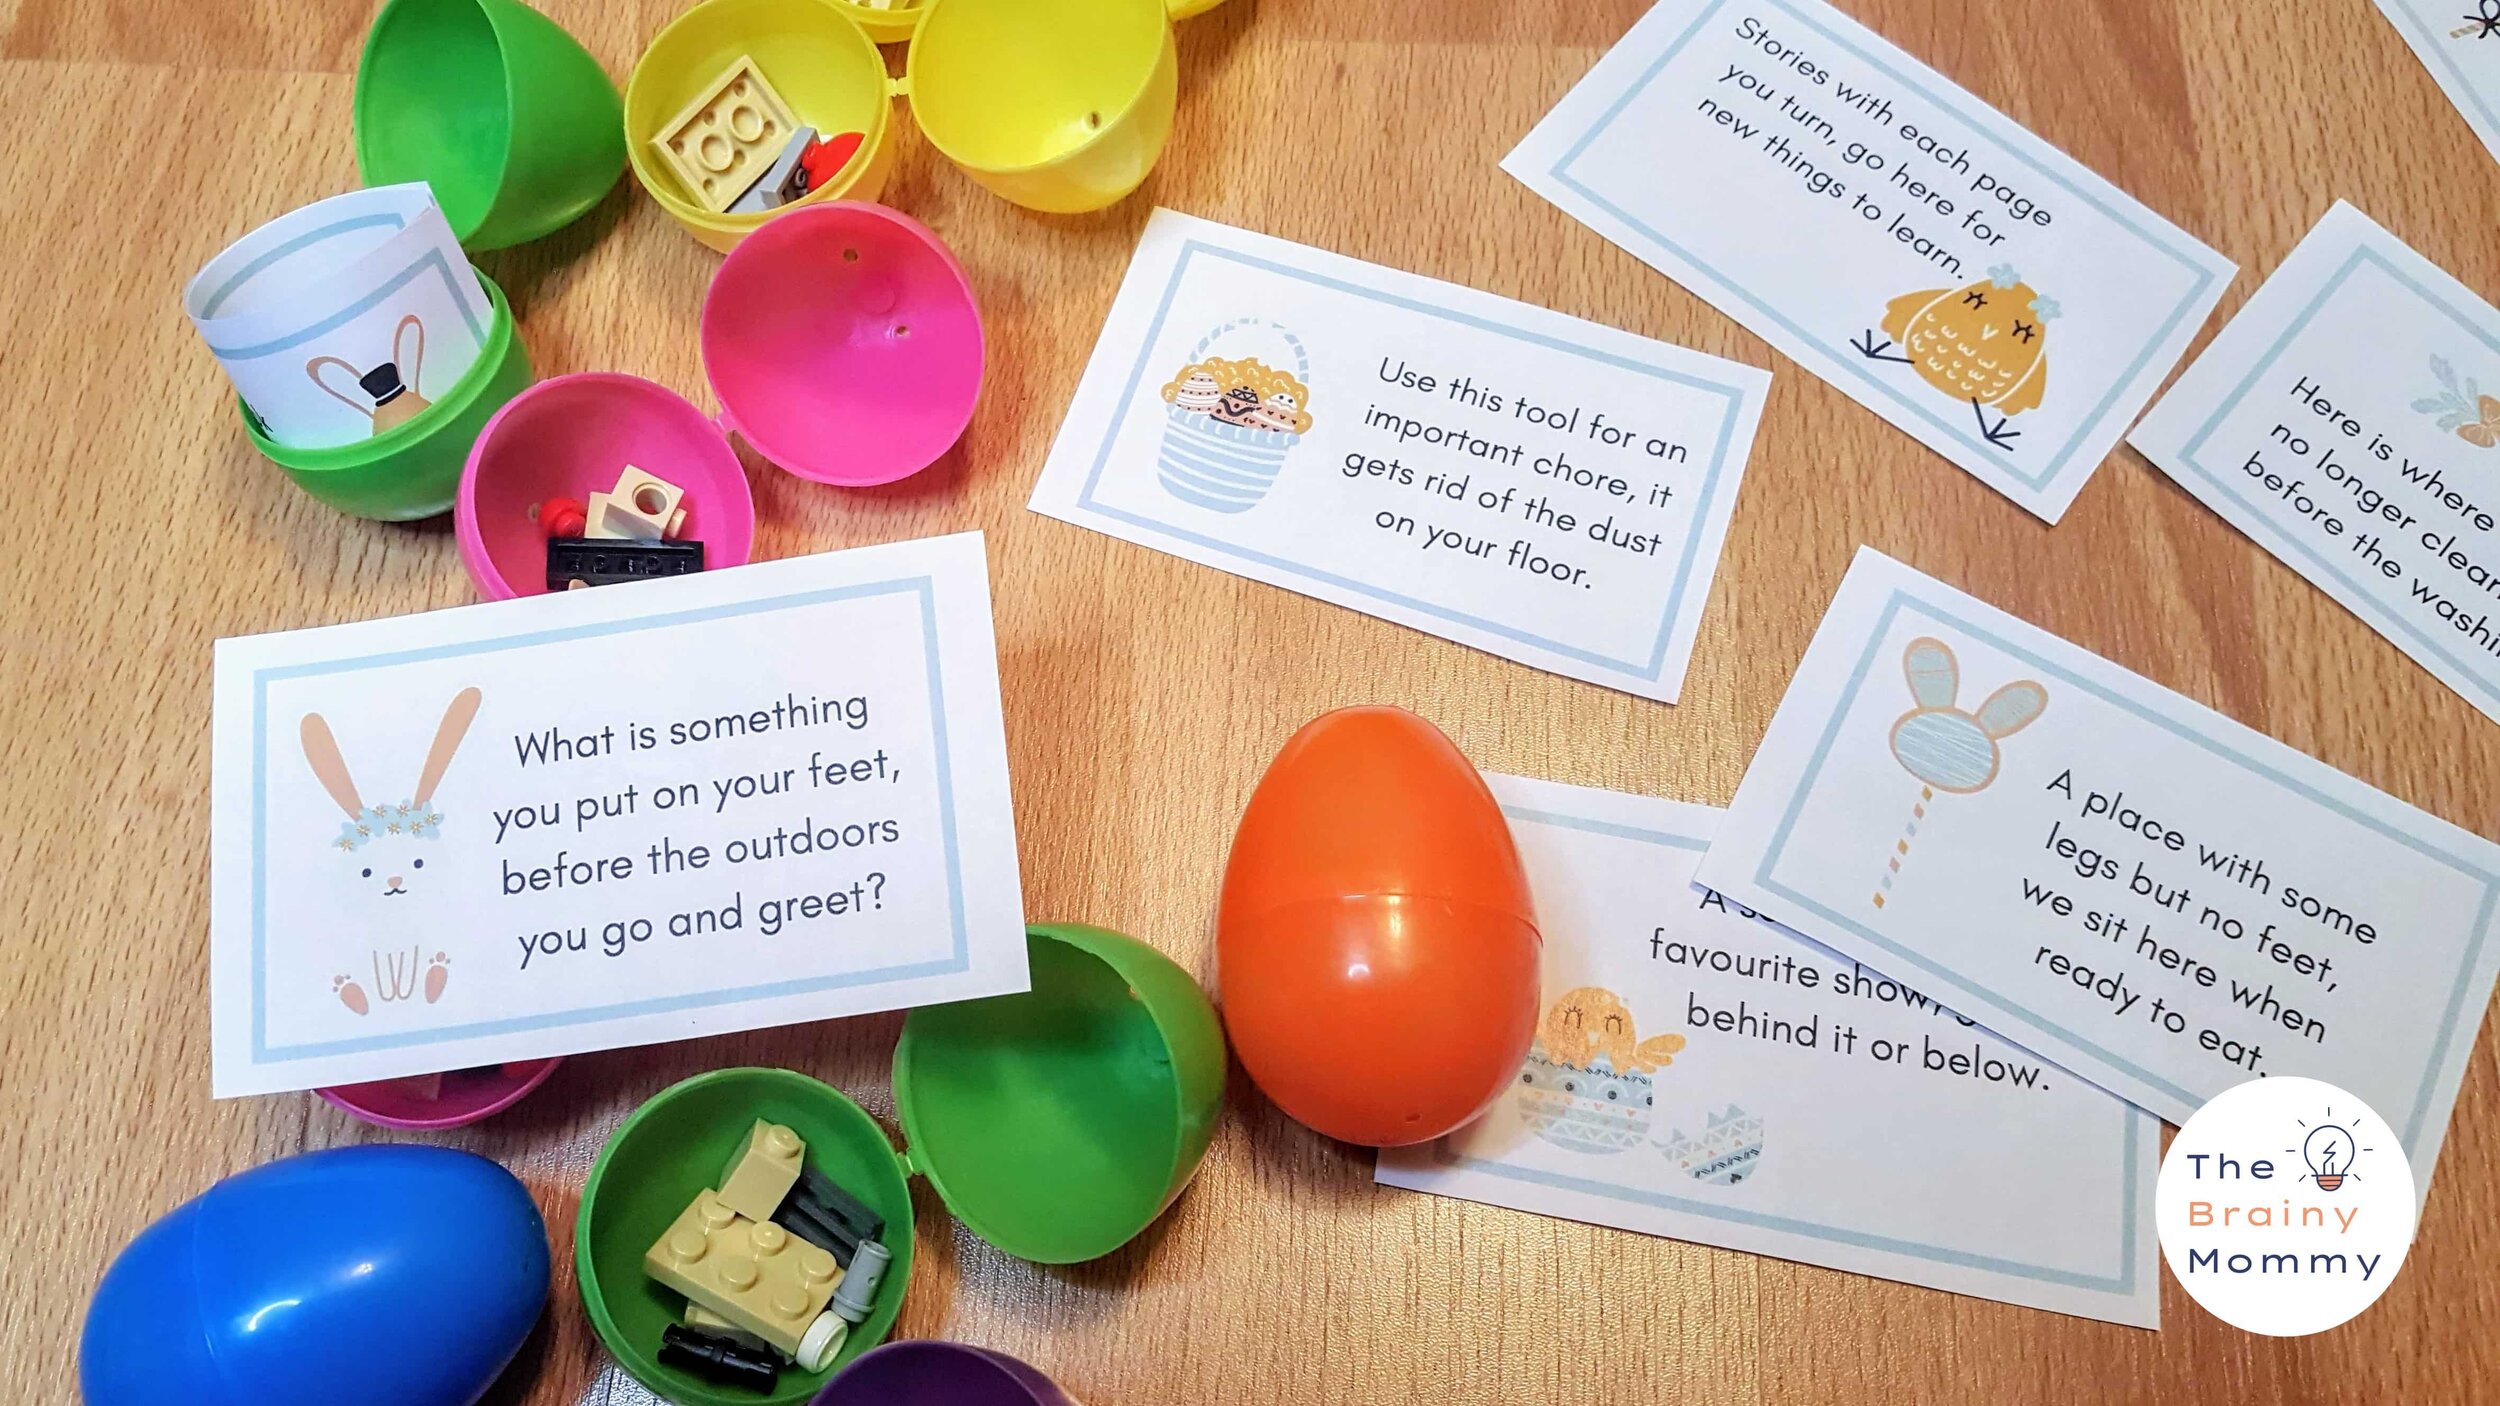 Indoor Easter Egg Scavenger Hunt and Free Printable Clues — The Brainy Mommy - activity ideas, educational resources, reviews